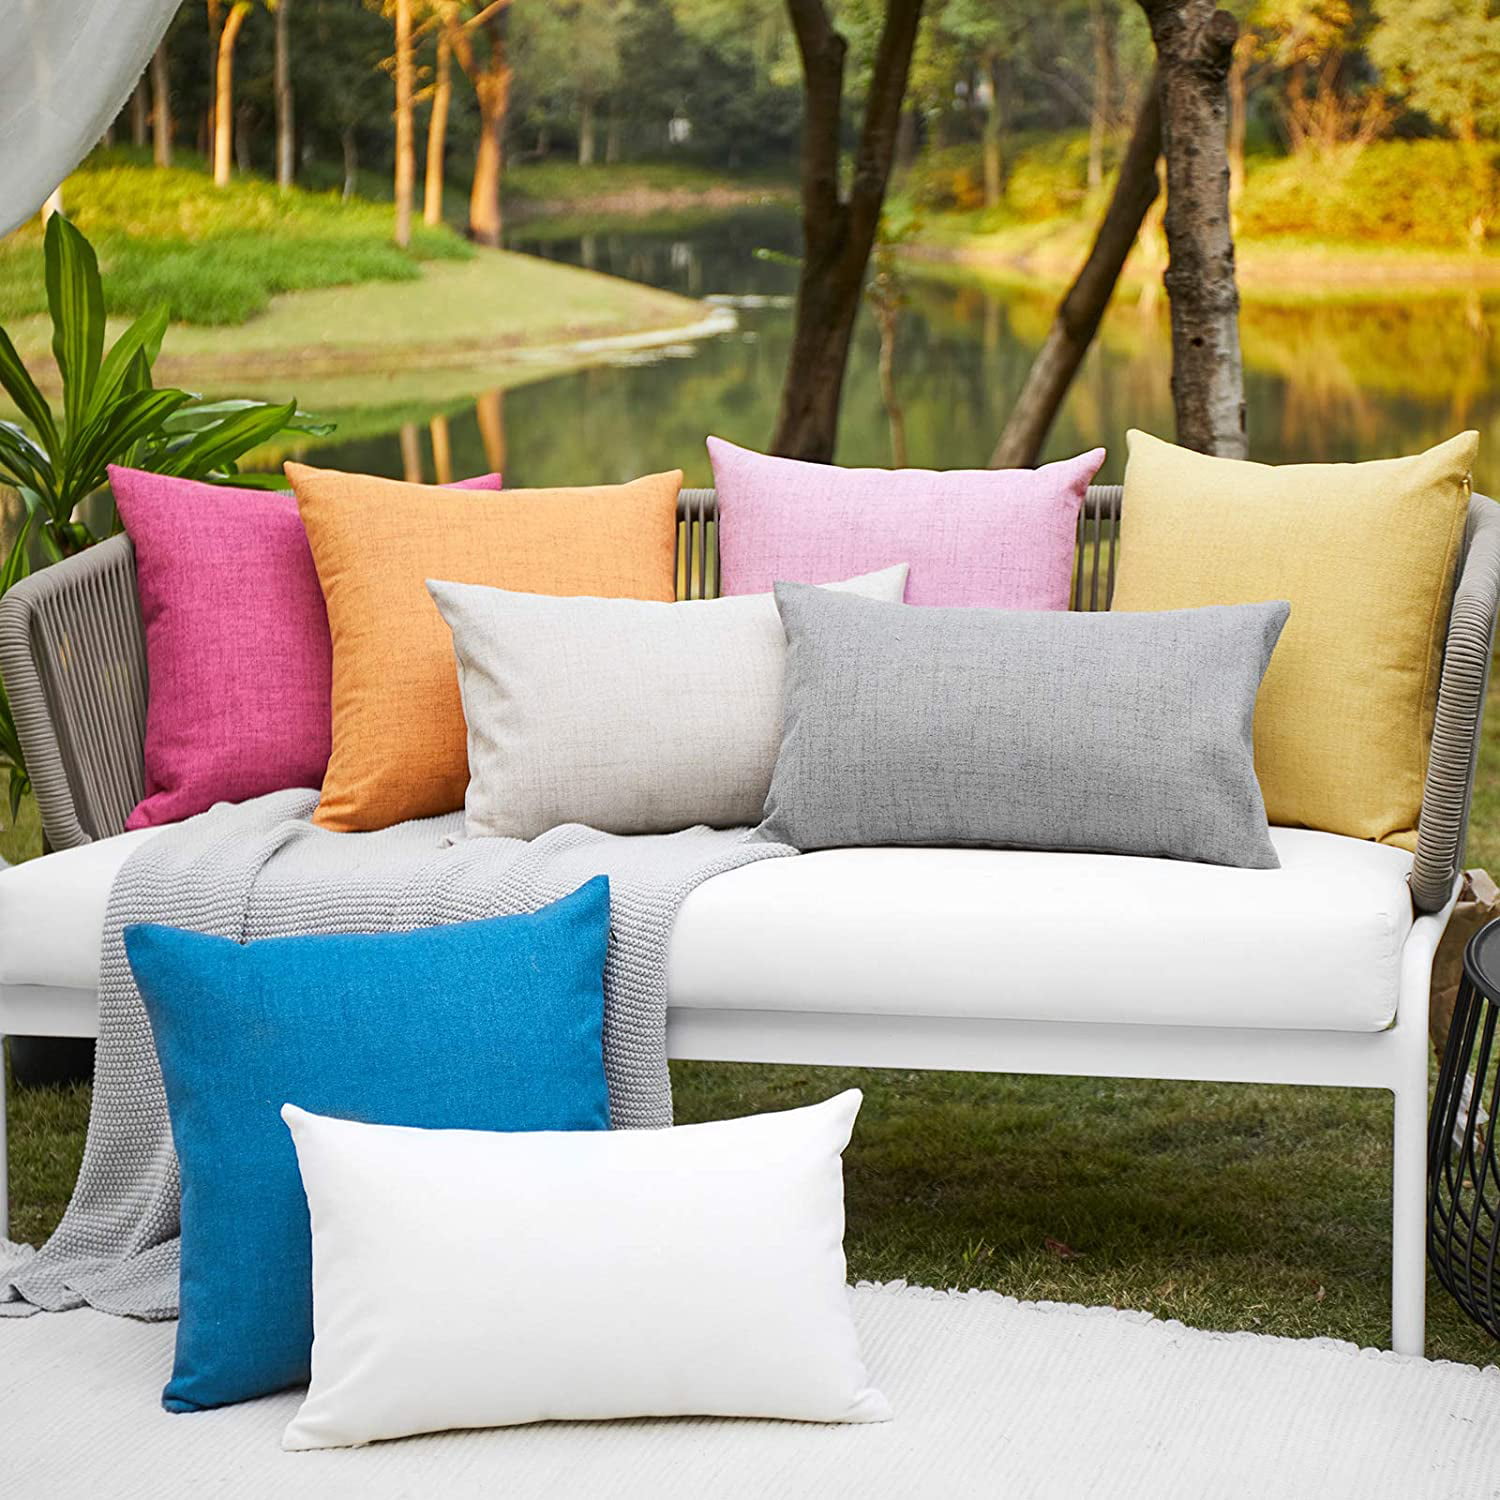 Codi 18x18 Outdoor Pillows - Premium Pillows Inserts Set of 2, Water Resistant Upgraded Decorative Stuffing Throw Pillows for Patio Furniture, Couch